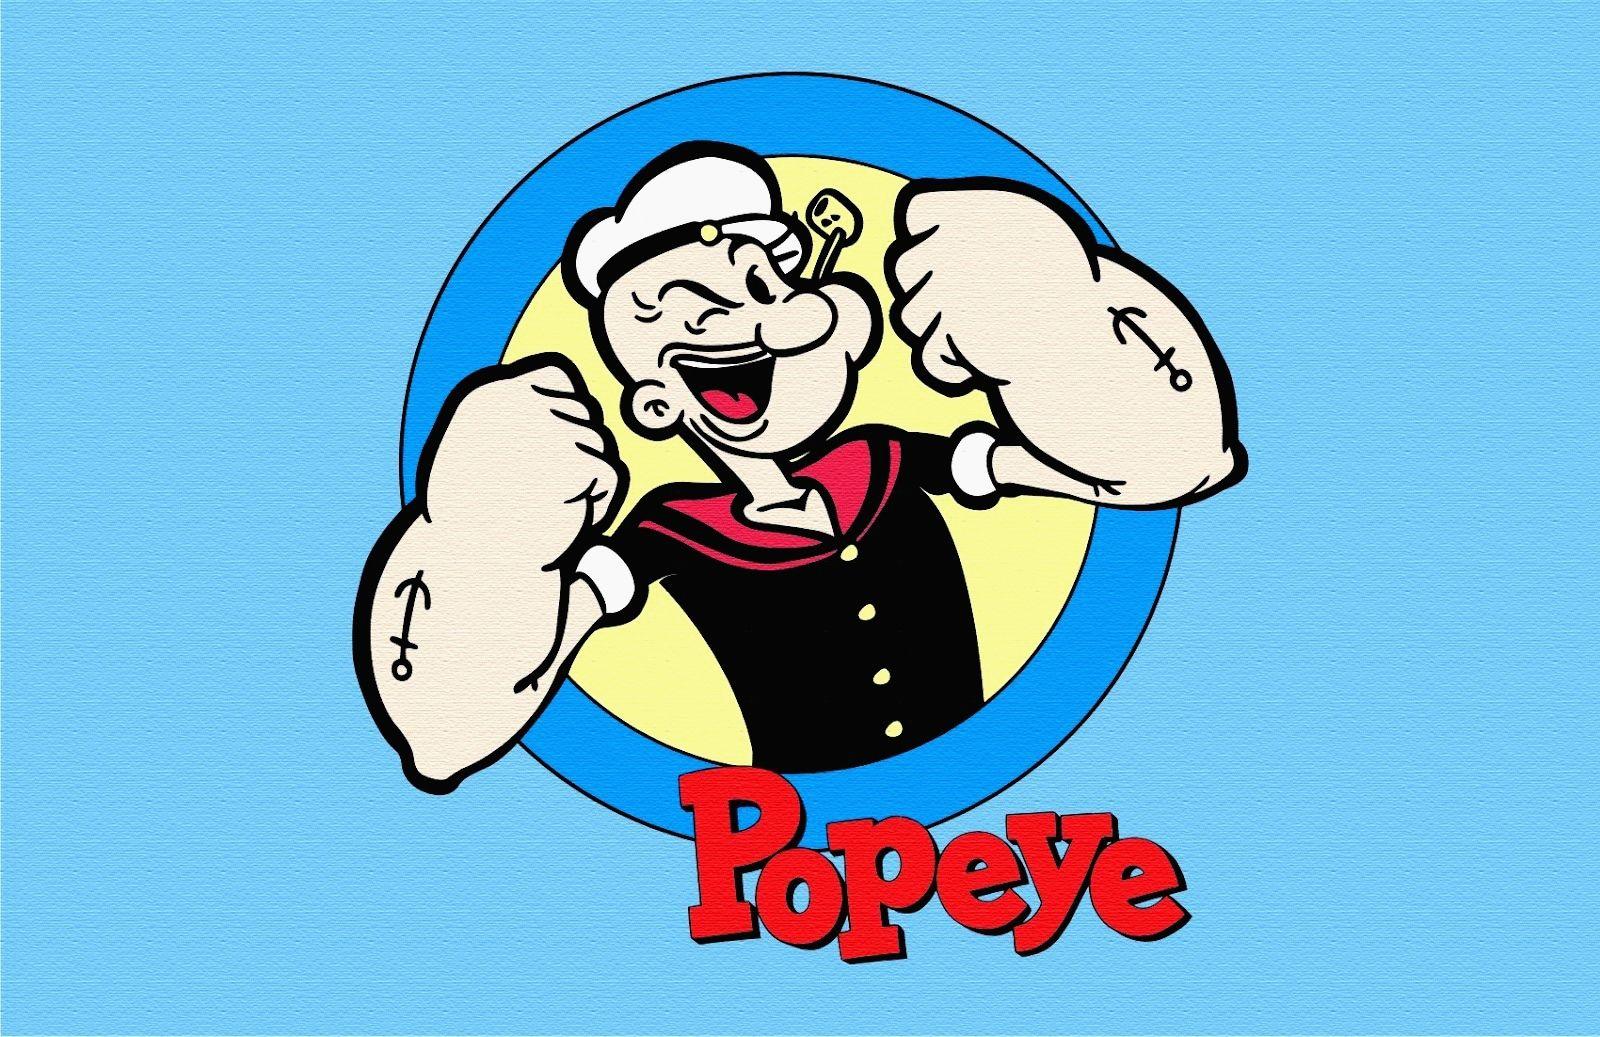 Popeye the Sailor Man HD Image for Sony XPeria Z2